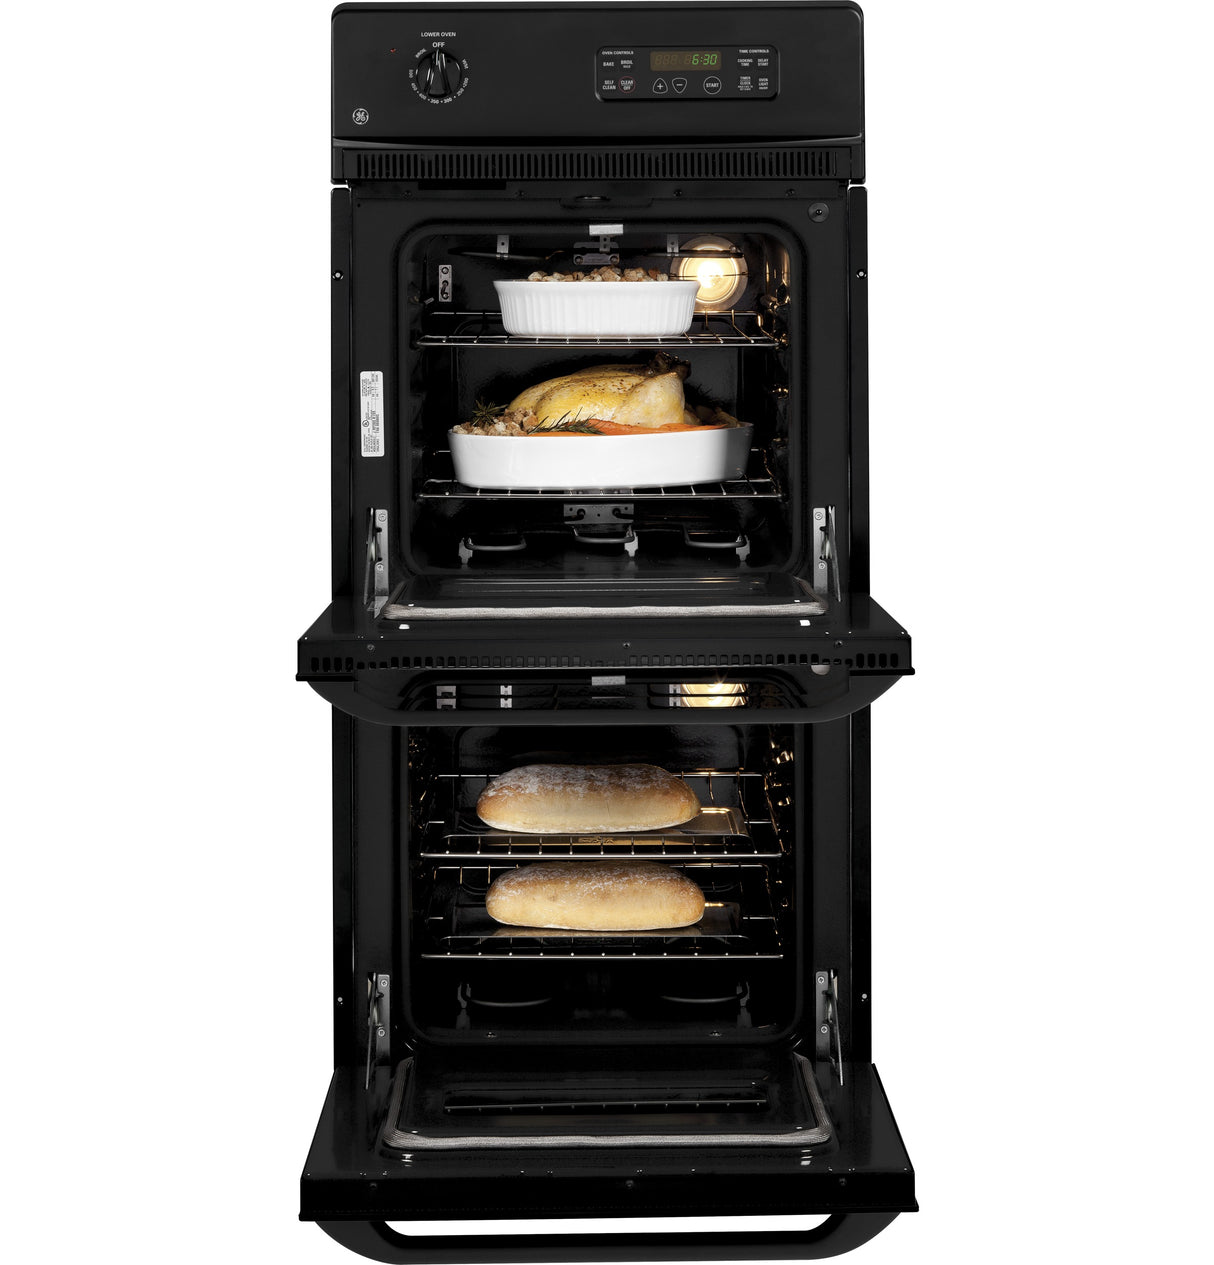 GE(R) 24" Double Wall Oven - (JRP28SKSS)